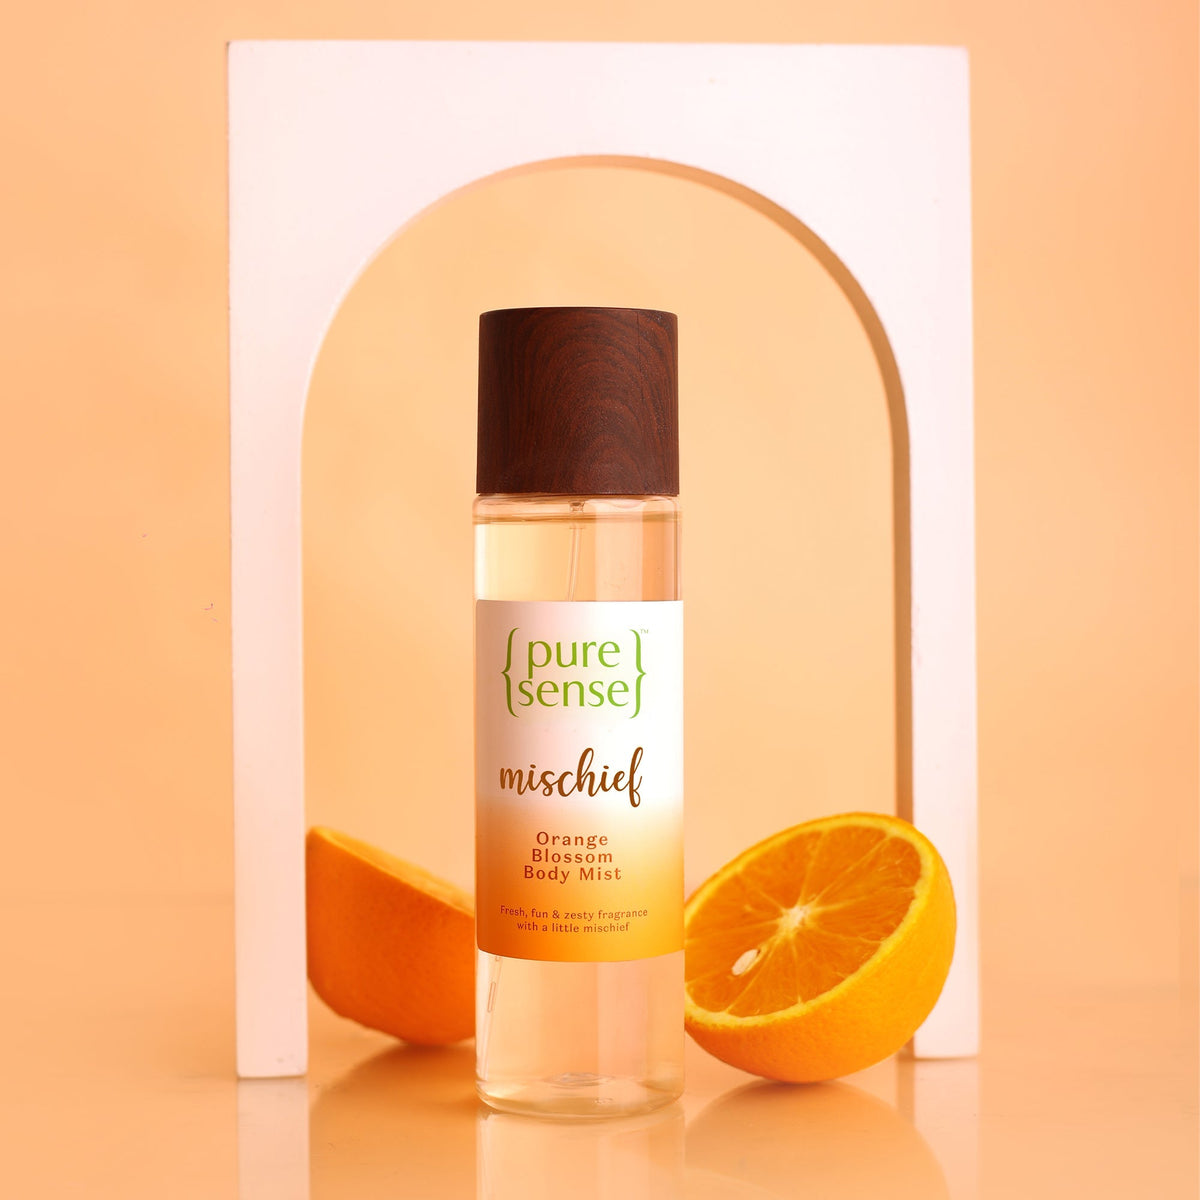 [JIO] Mischief Orange Blossom Body Mist | From the makers of Parachute Advansed | 150ml